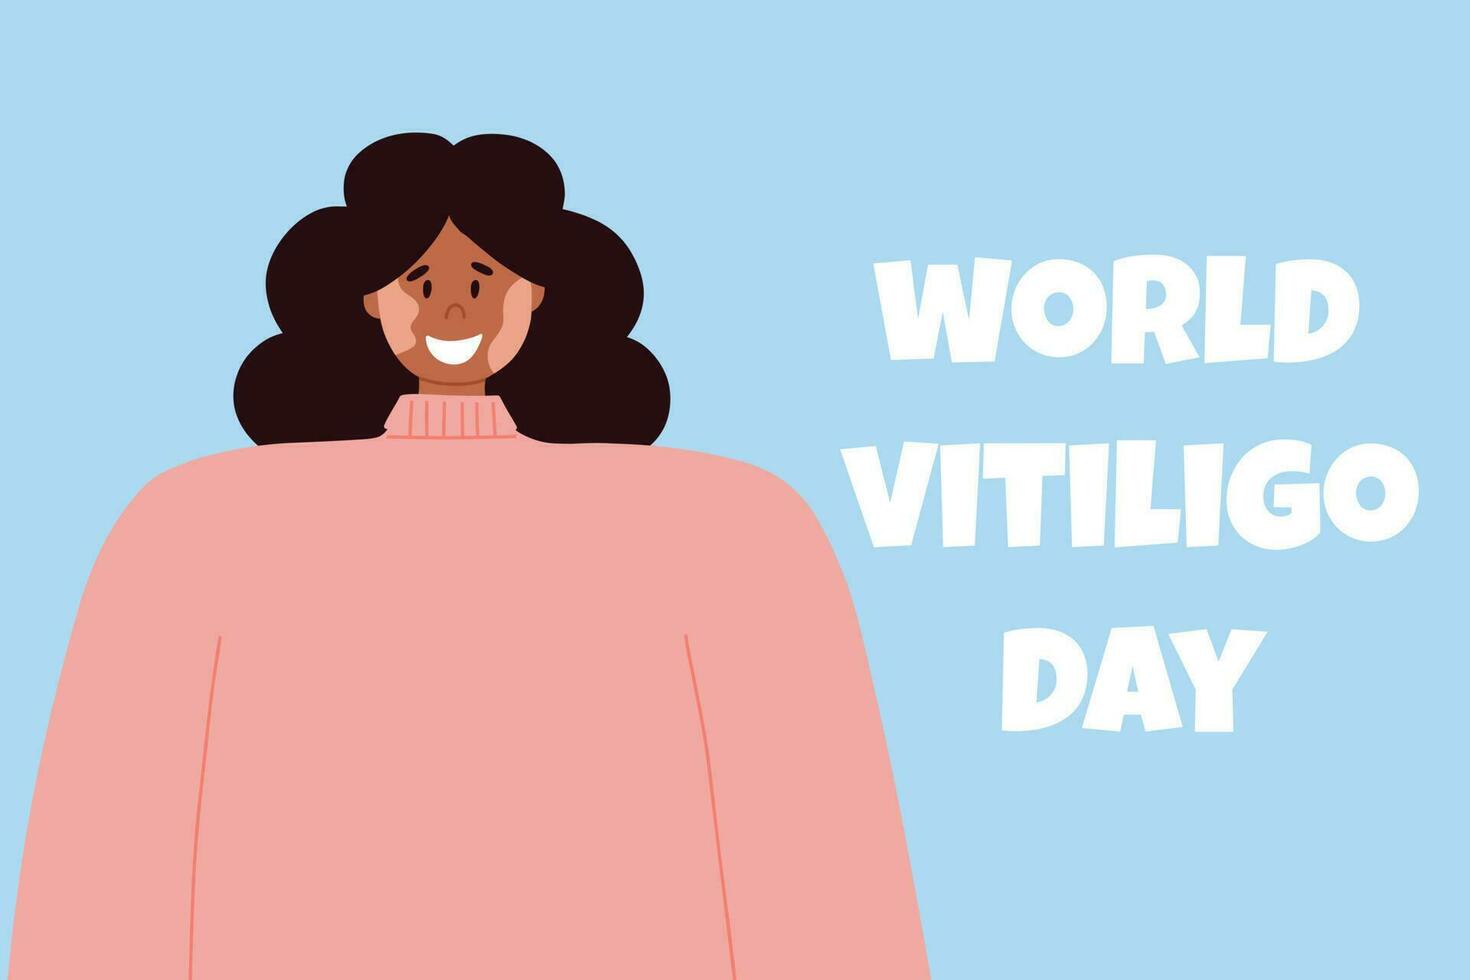 A woman with vitiligo skin disease accepts her appearance, loves herself. World Vitiligo Day. vector illustration. Poster with a happy girl with vitiligo.